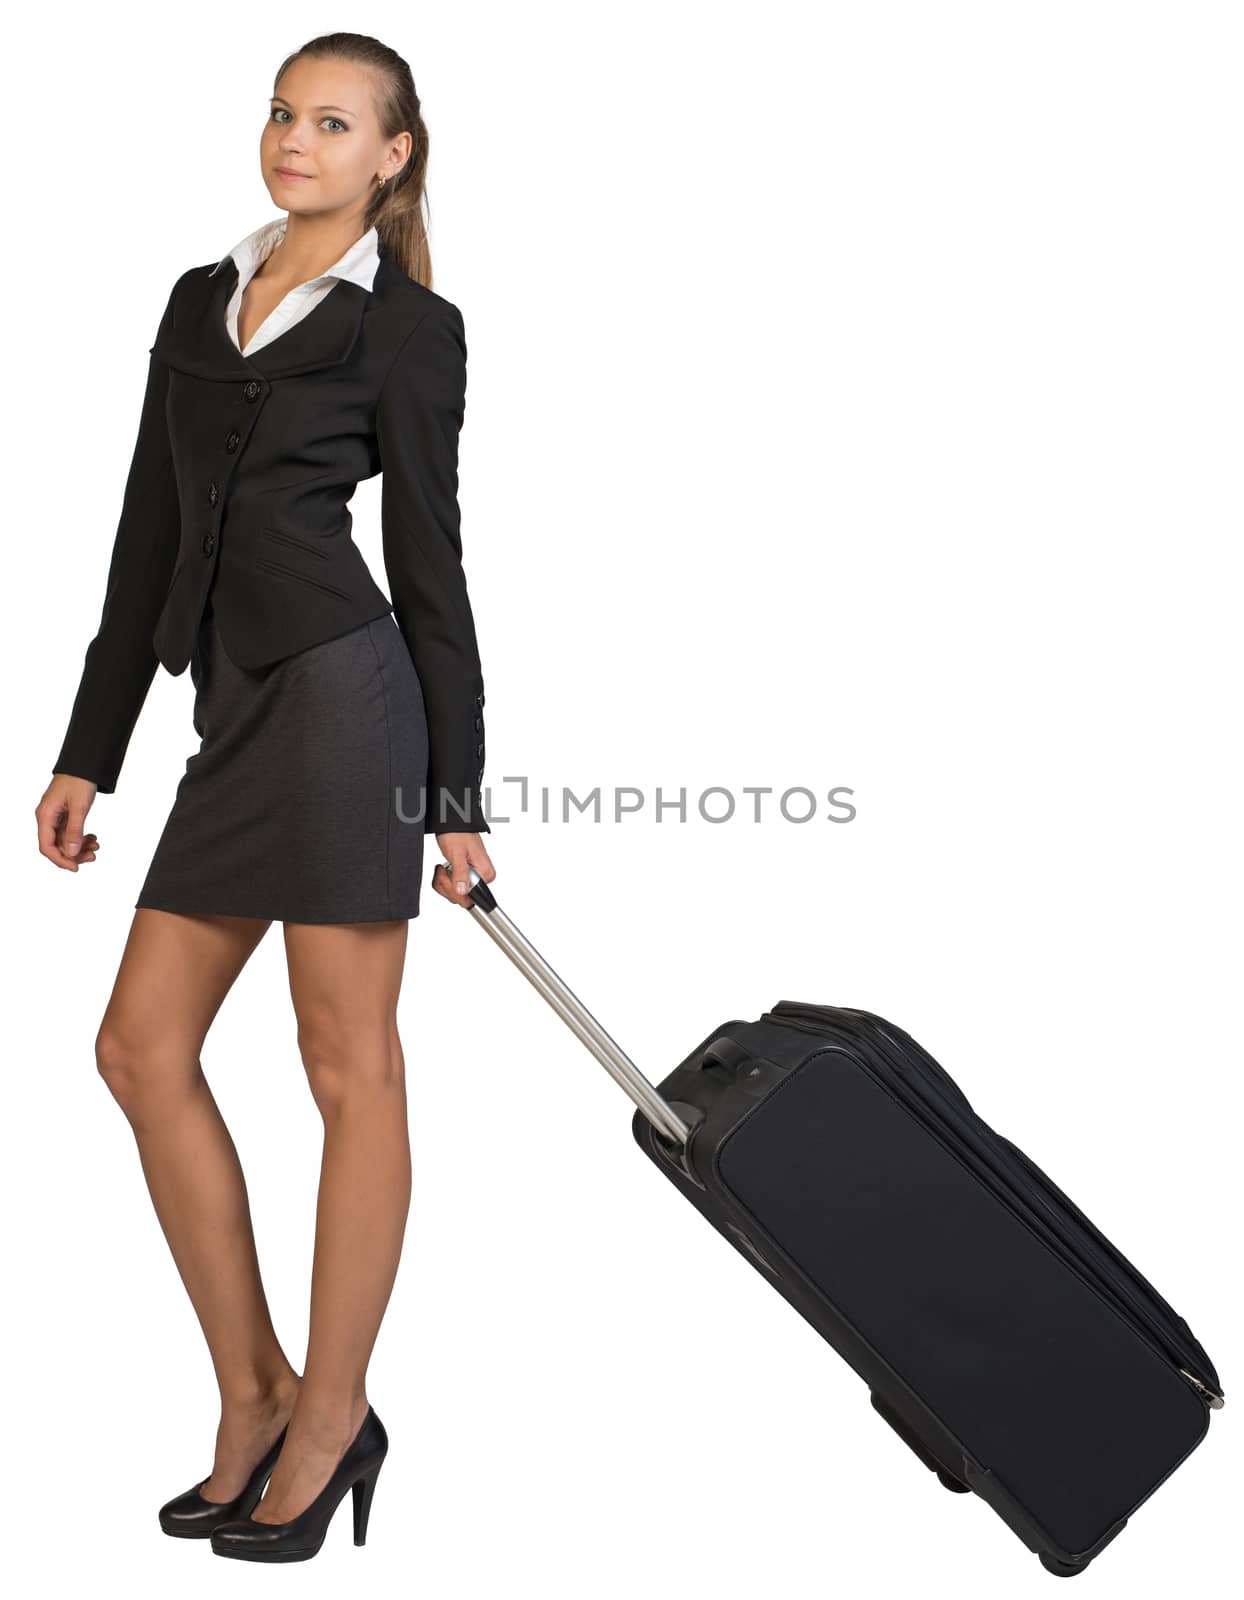 Businesswoman holding wheeled bag in moving position, looking at camera, smiling. Isolated over white background